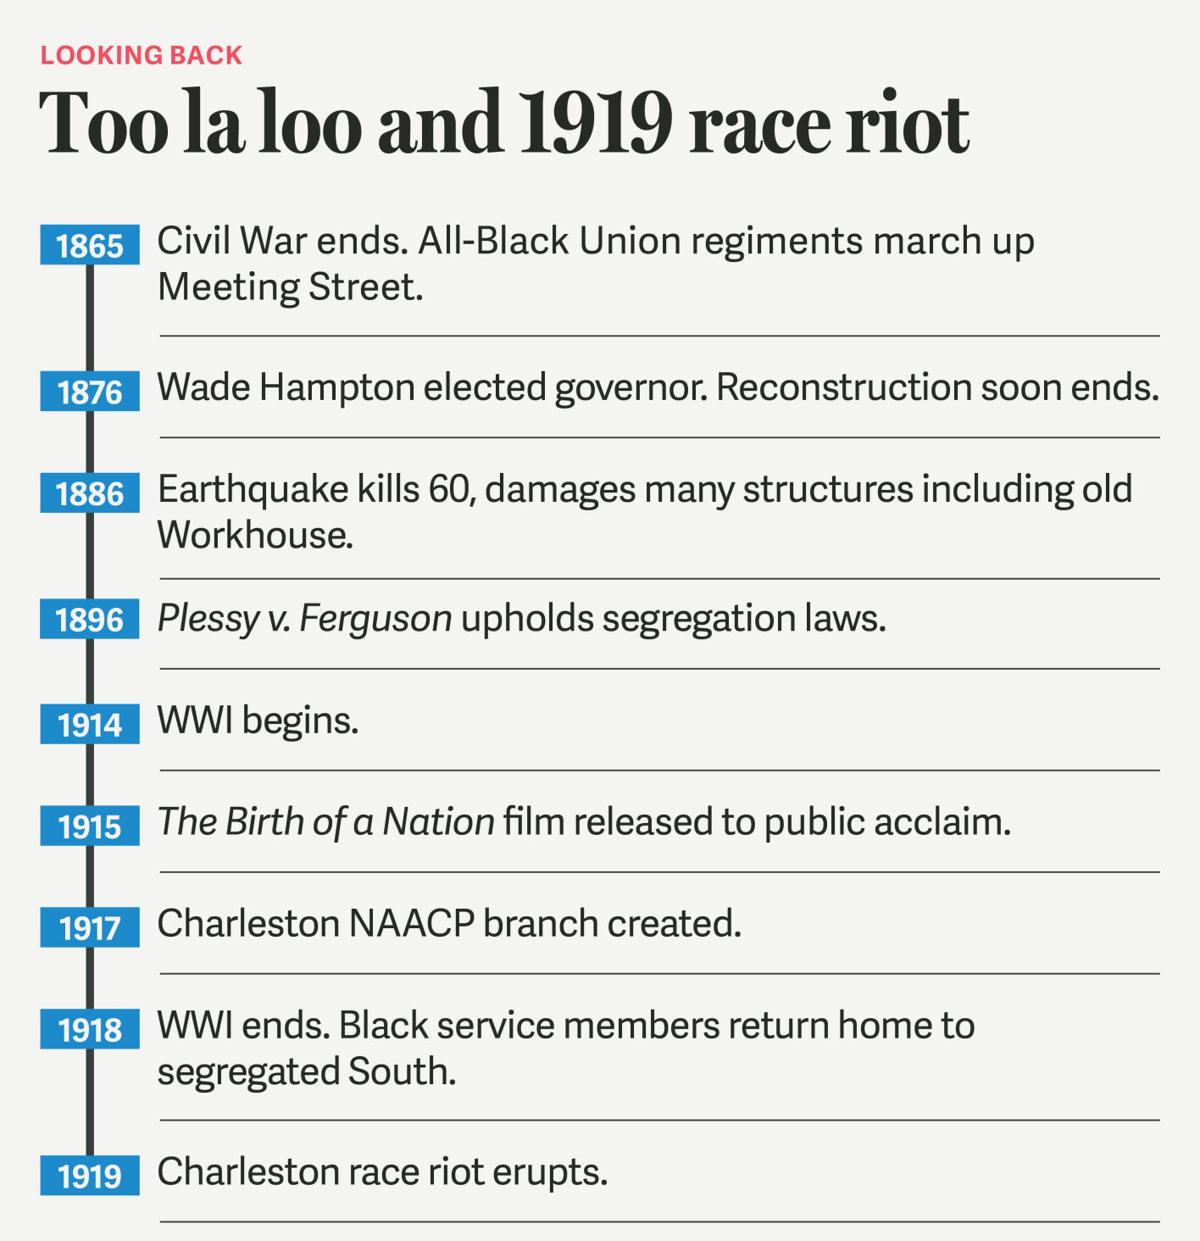 Forsaken History In Her 350th Year Key Places In Charleston S Racial Past Long Neglected Features Postandcourier Com - roblox piano badge alone in a dark house